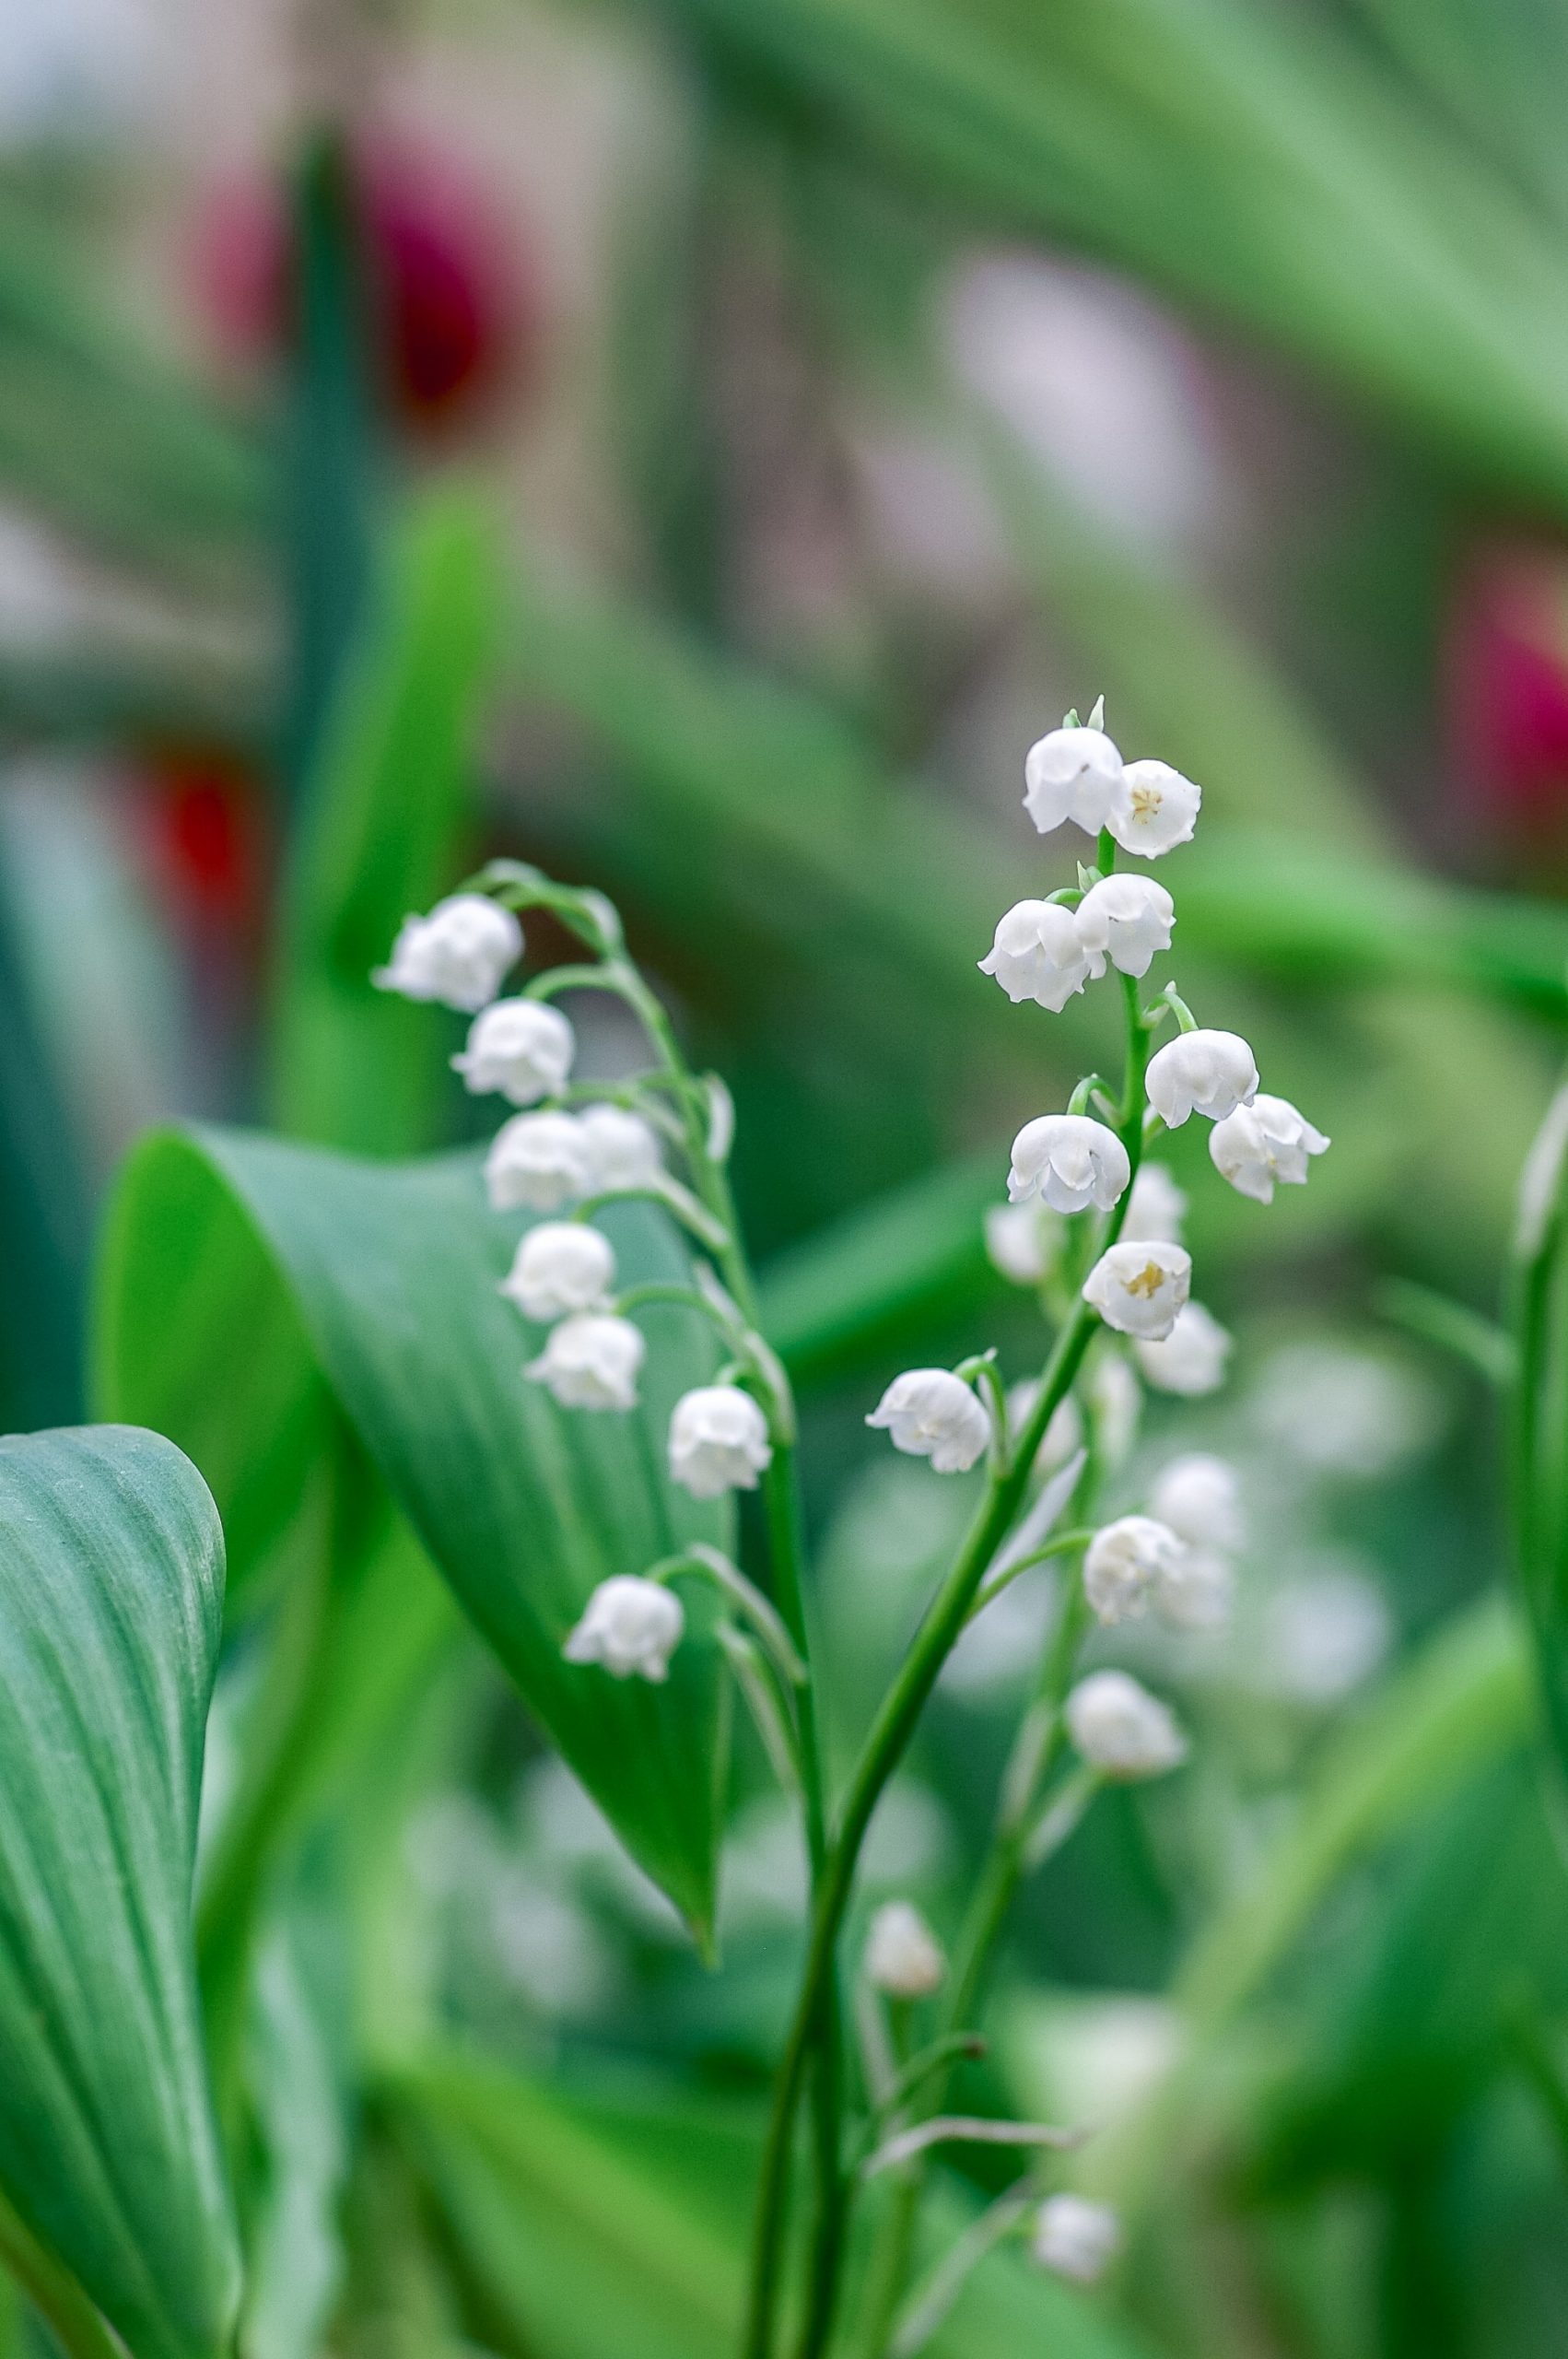 What Is The Difference Between Snowdrops And Lily Of The Valley?